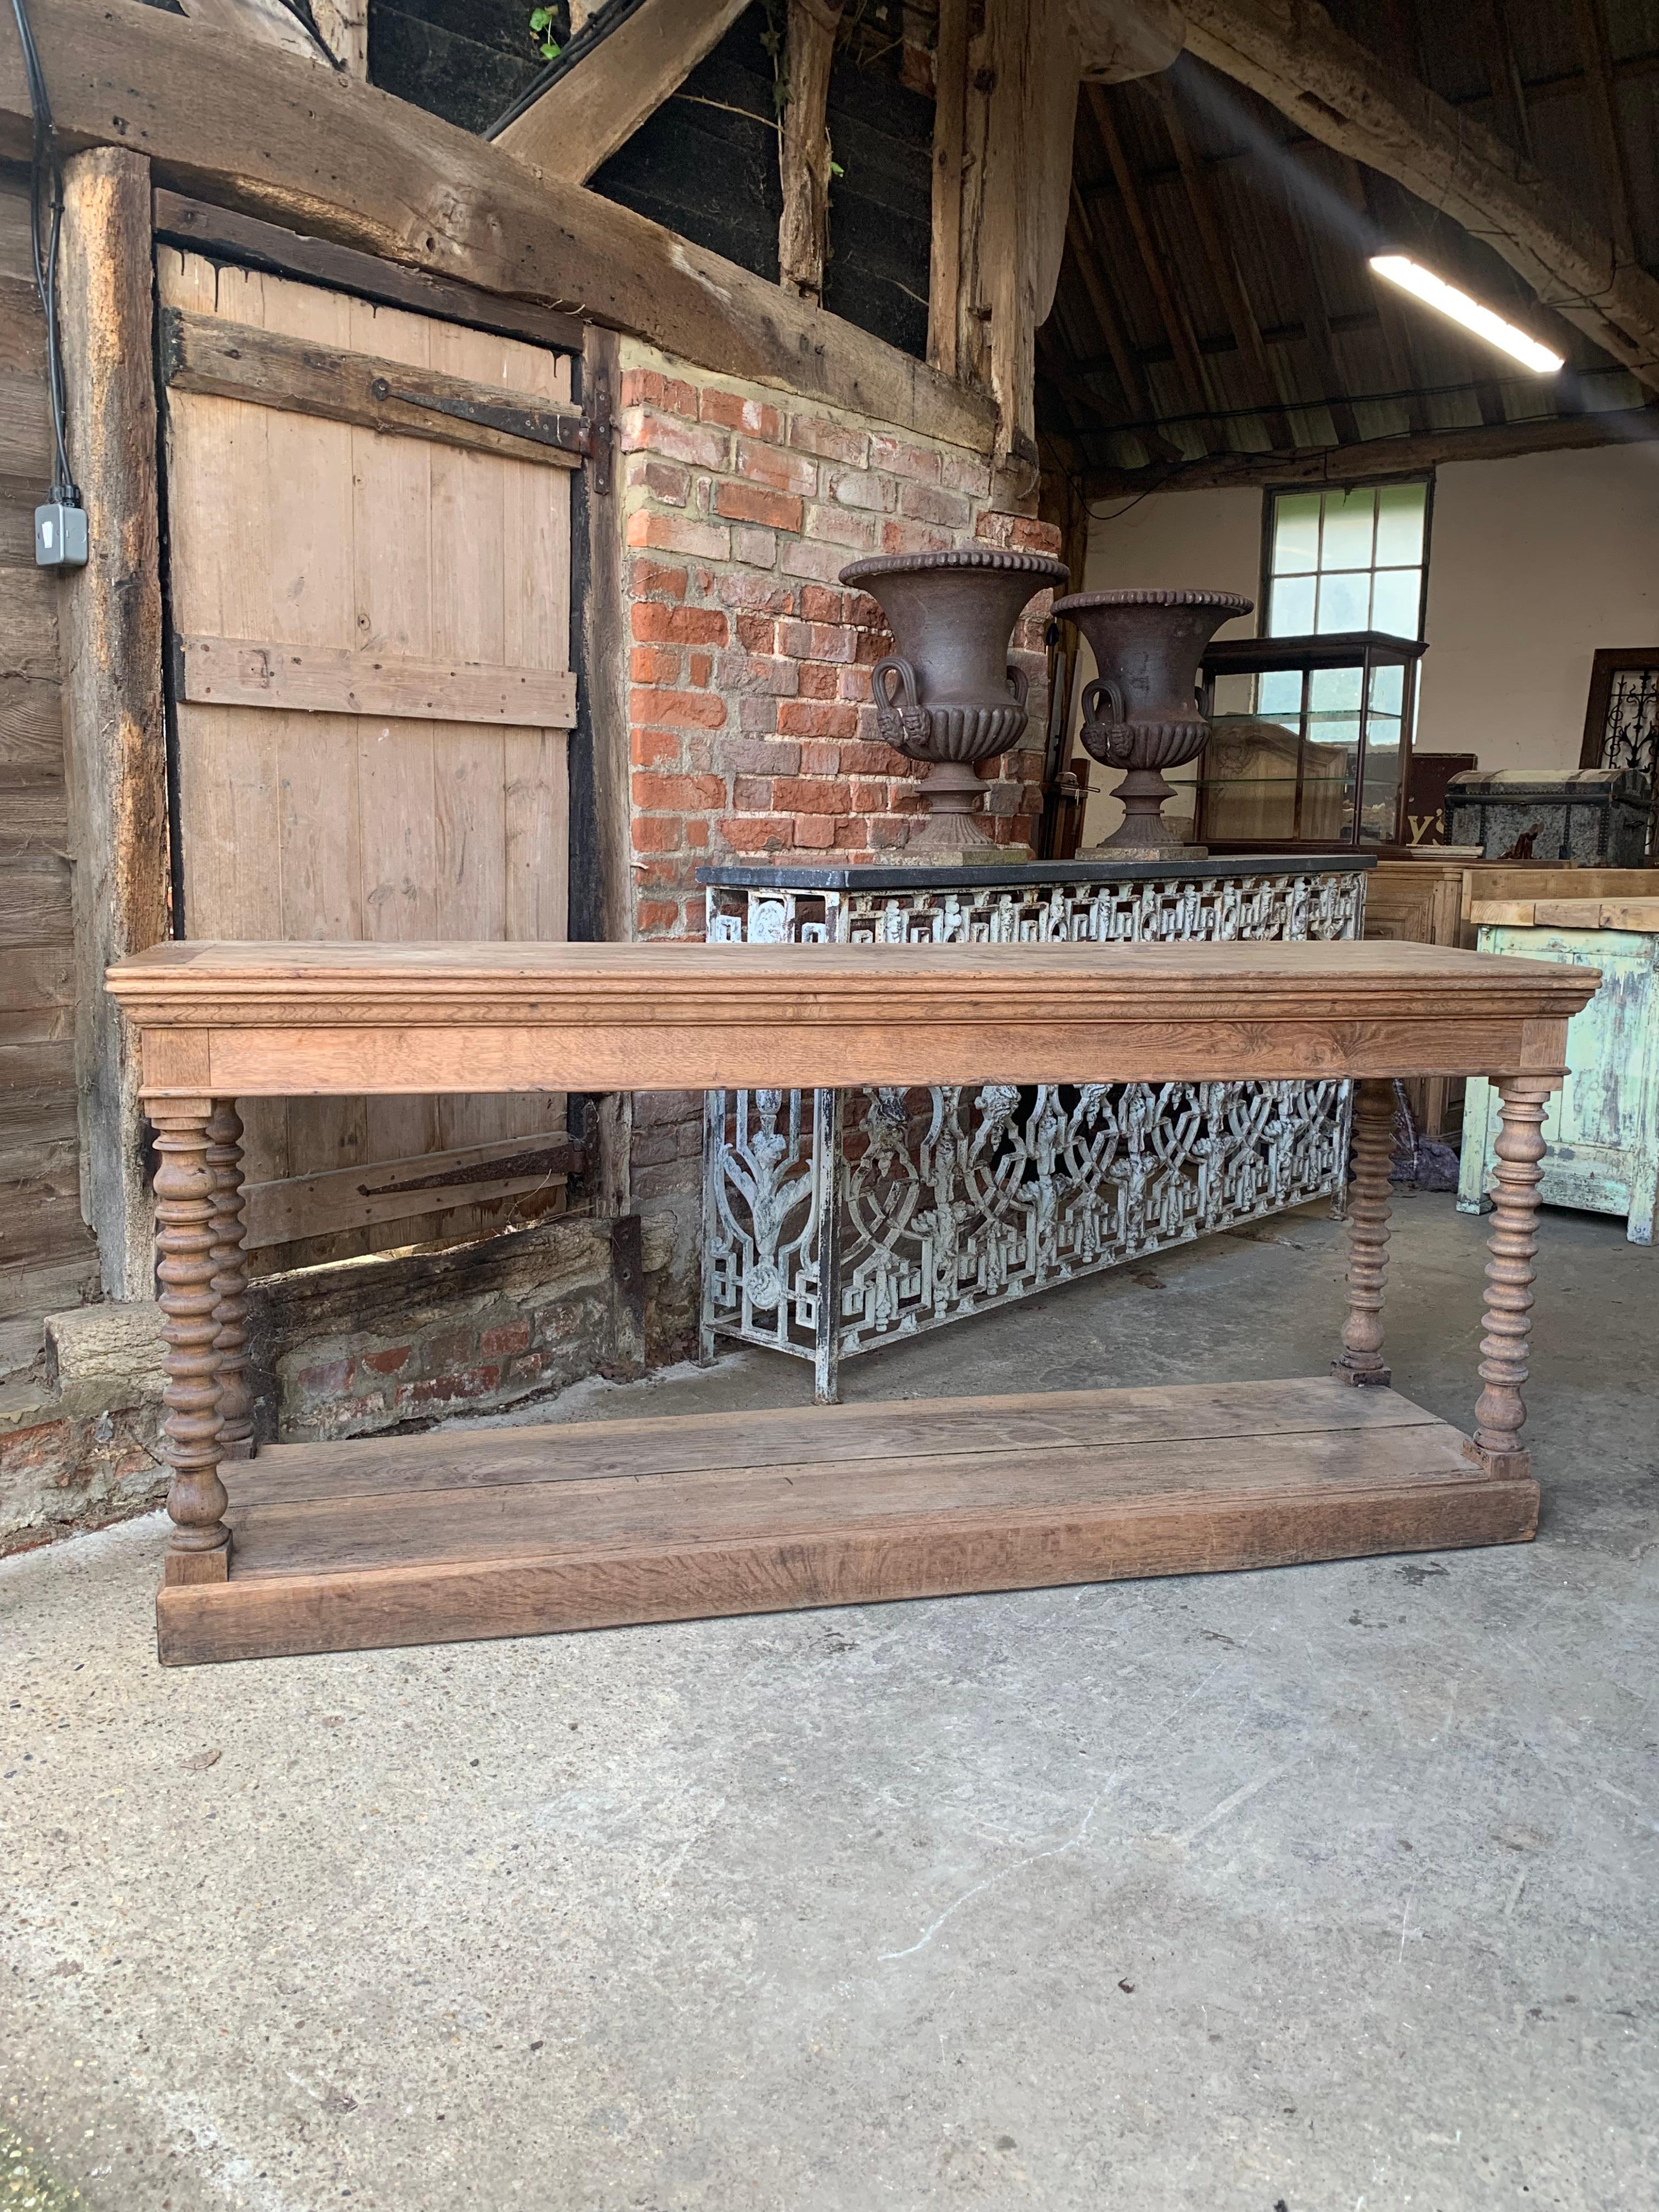 A stunning 19th century French bleached oak drapers console table with wonderful turned legs. The oak has a beautful aged patina giving it a great look. It has a pair of hidden drawers on one side which run smootly. This is a very nice quality table